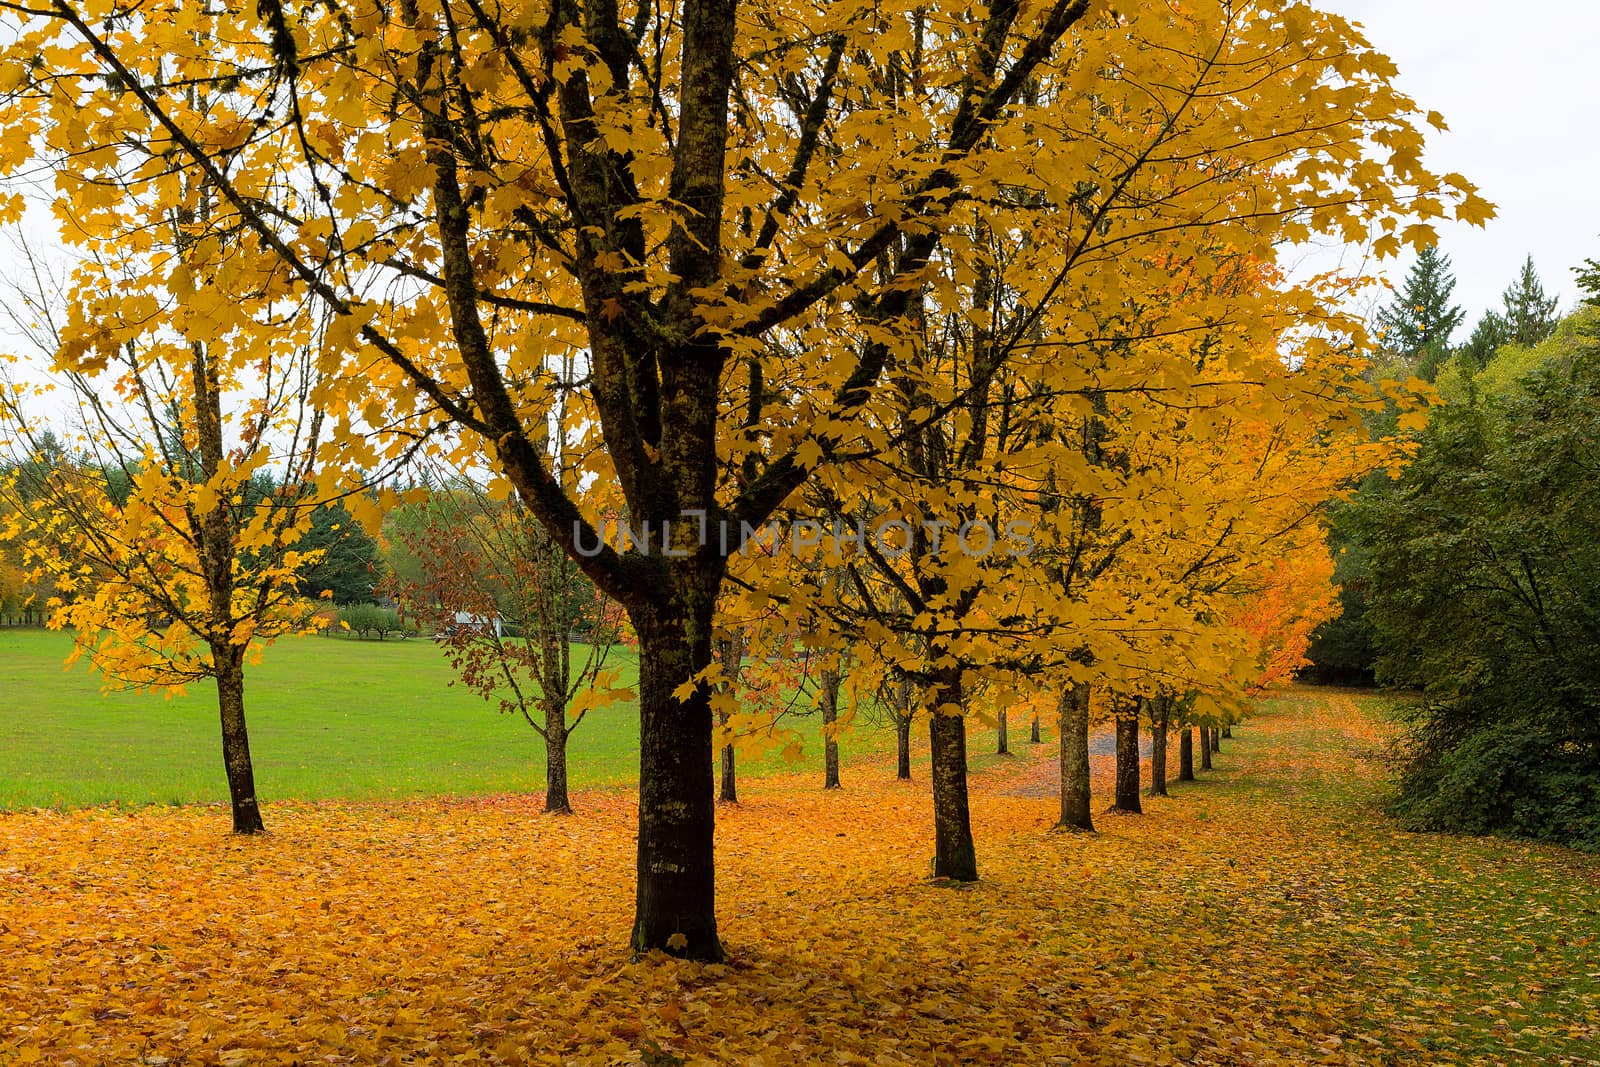 Golden Fall Colors on Maple Trees by jpldesigns